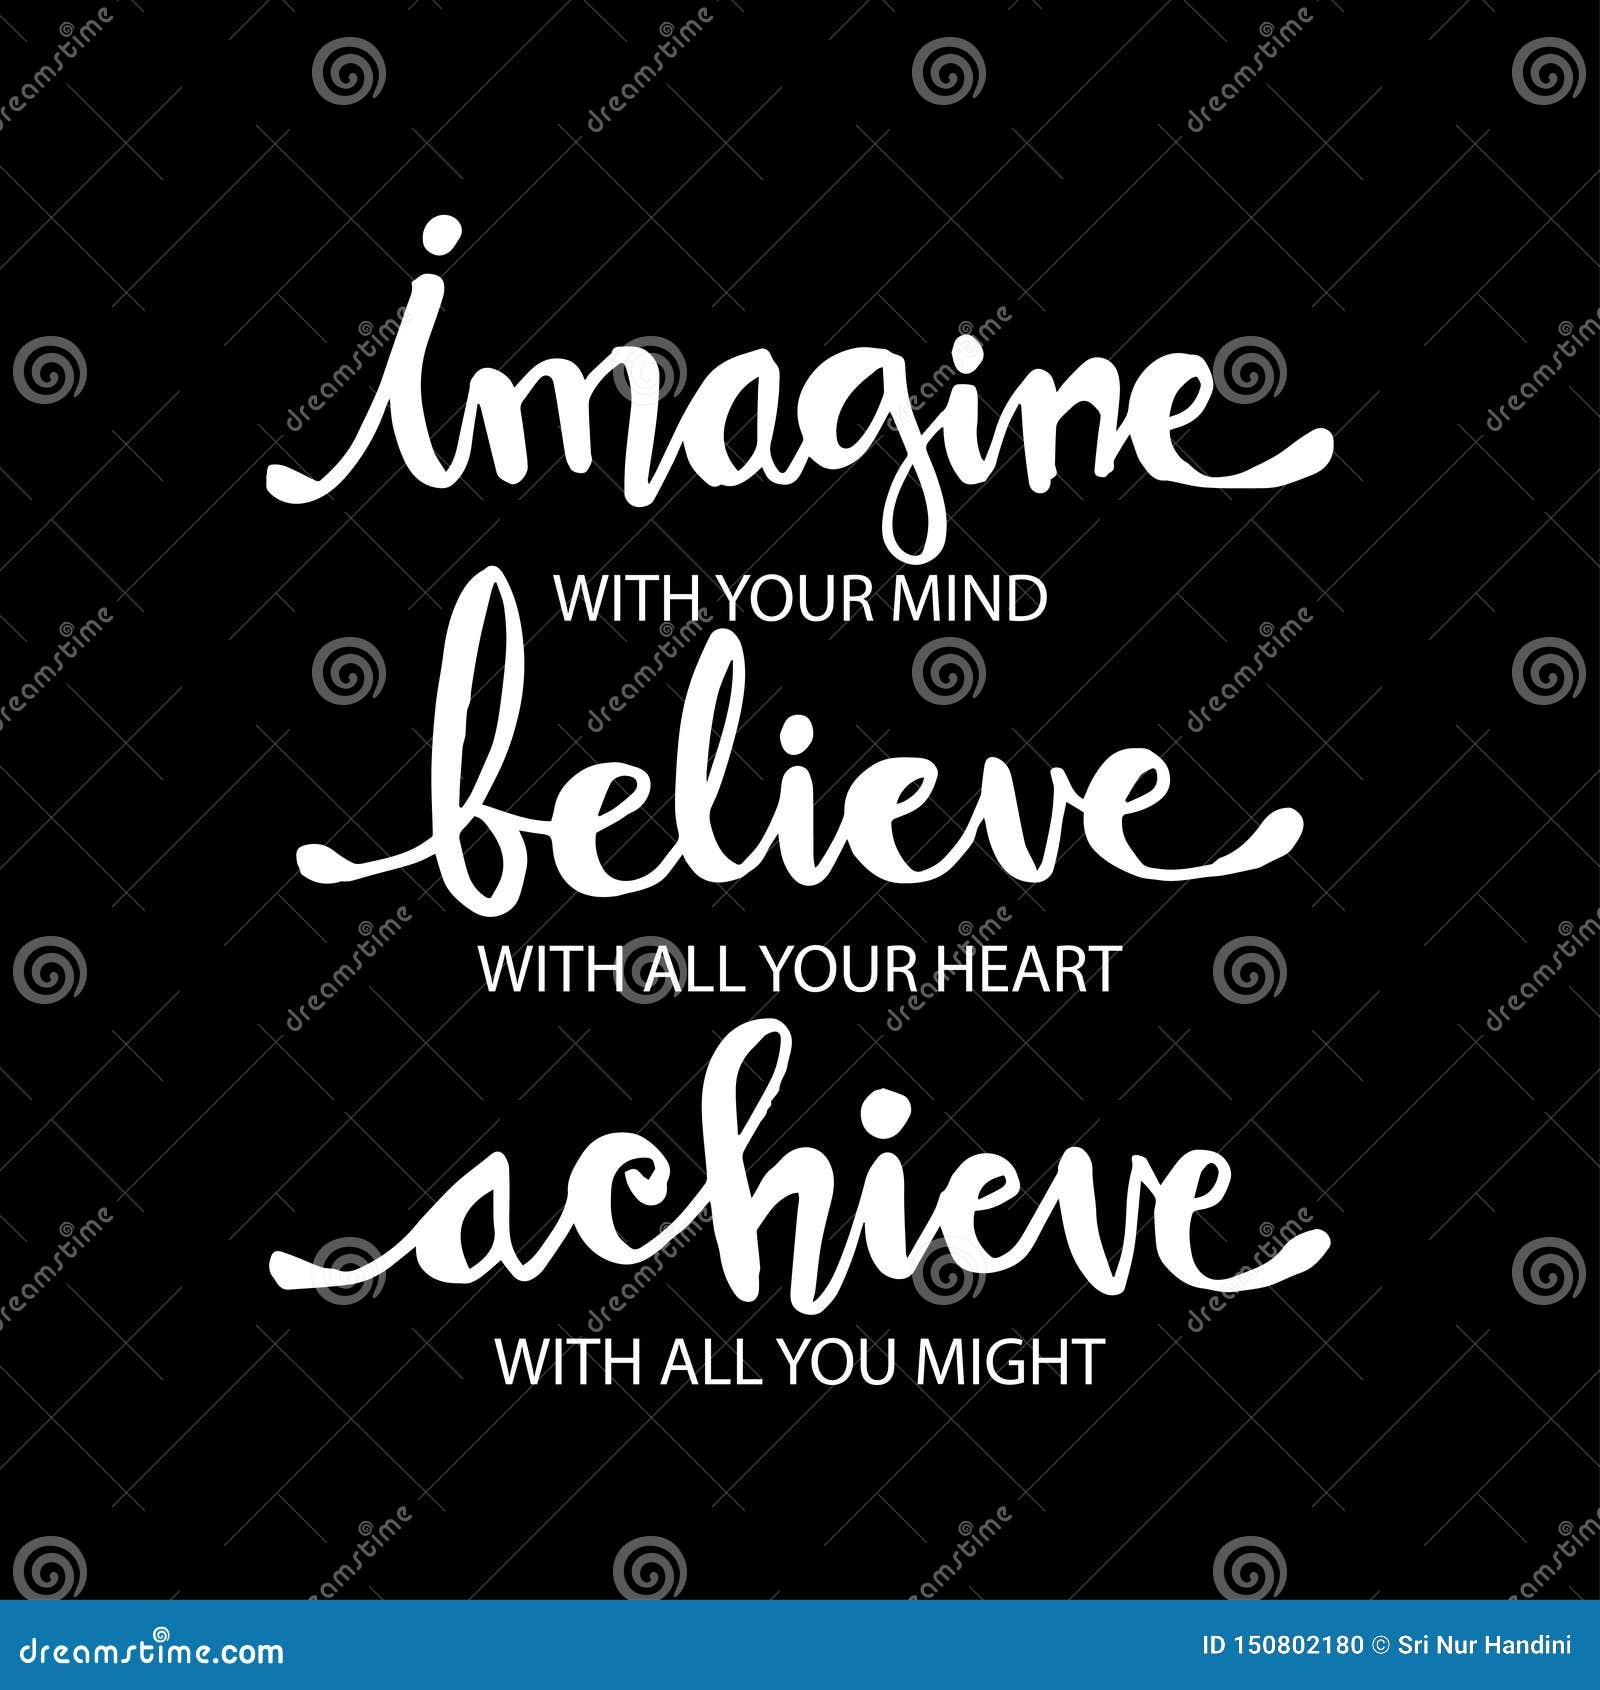 imagine with your mind, believe with your heart, achieve with all your might